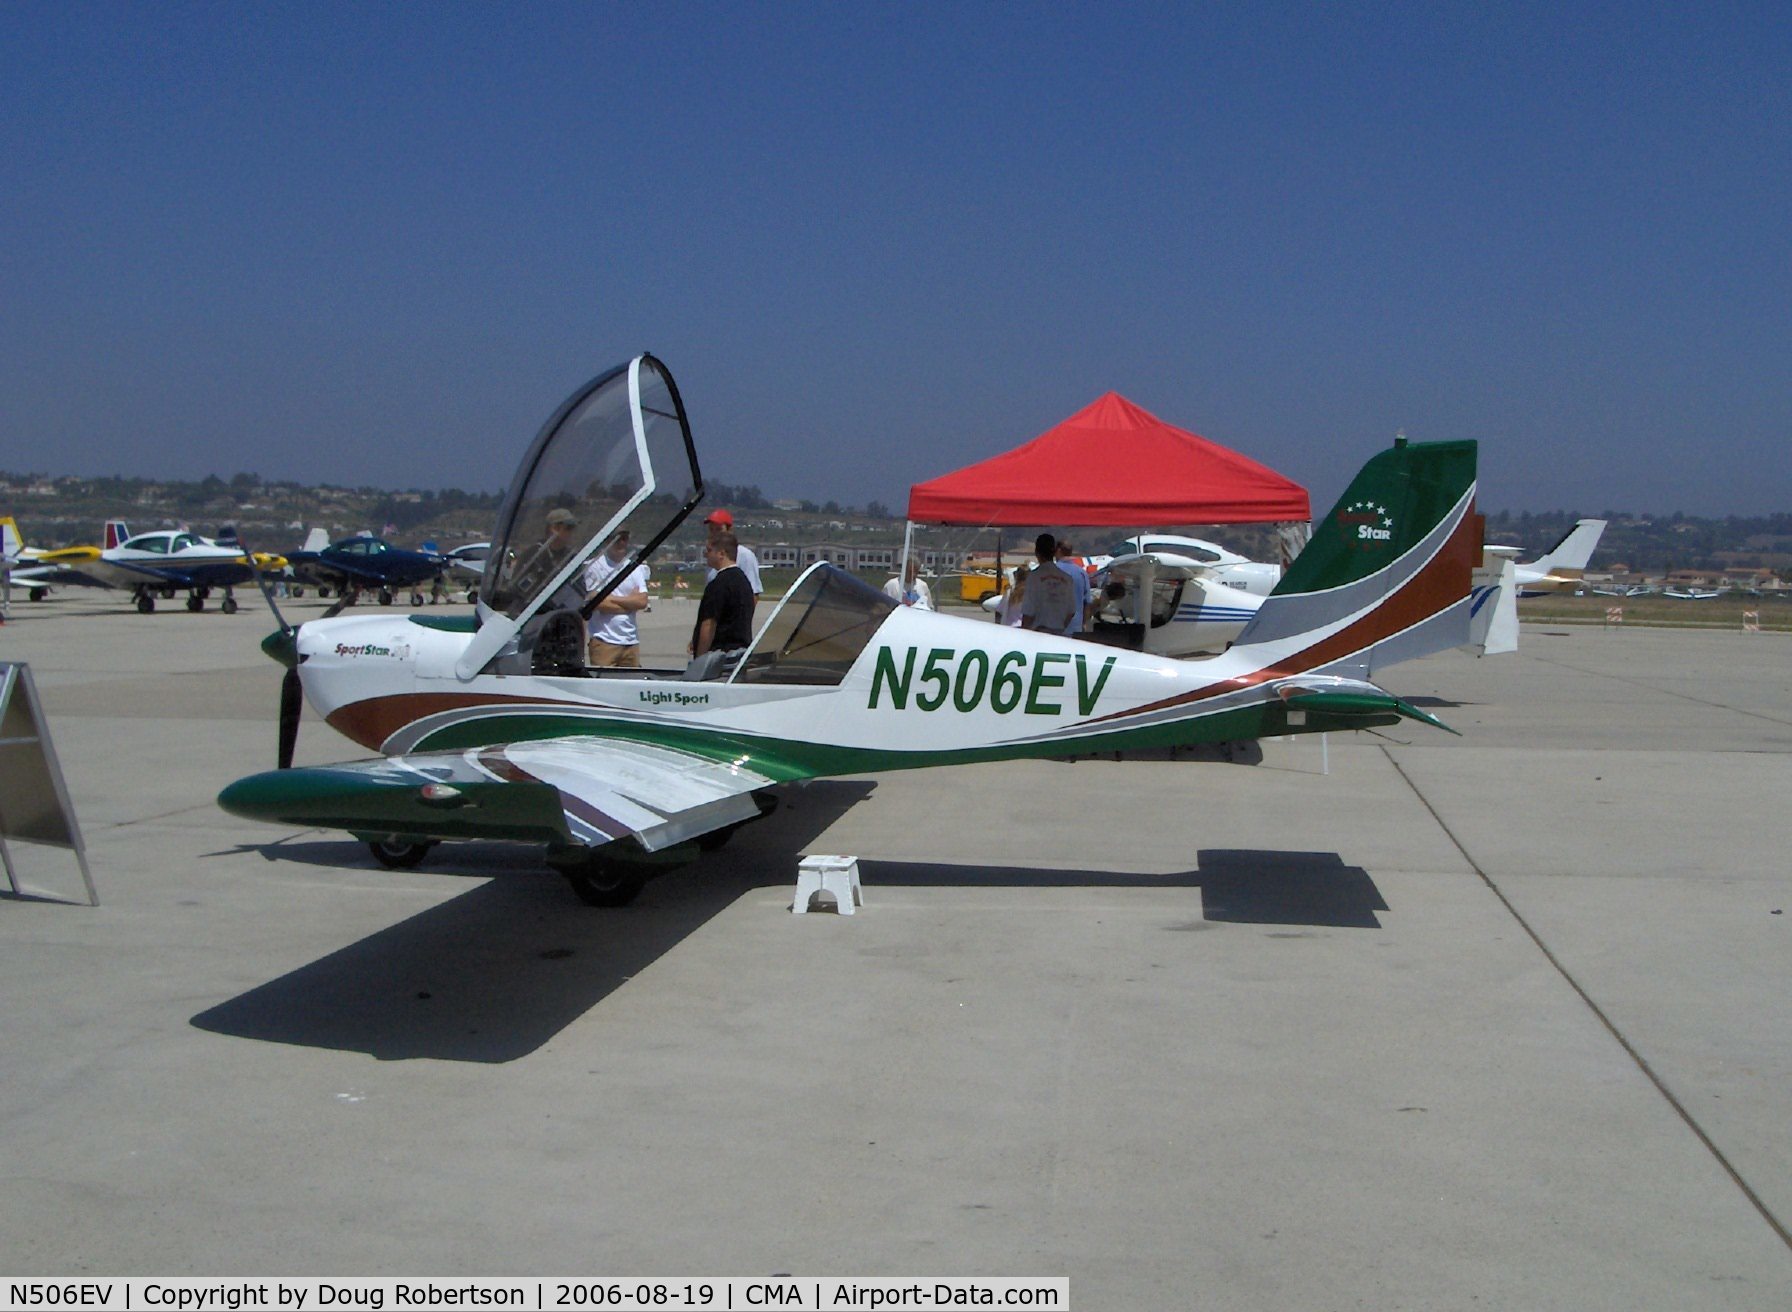 N506EV, 2006 Evektor-Aerotechnik Sportstar C/N 2006 0506, 2006 Evektor-Aerotechnik EV-97 SPORTSTAR, Rotax power, Light Sport Aircraft, the first LSA model approved by the USA FAA was the SPORTSTAR, called EUROSTAR in Europe with over 400 flying worldwide.